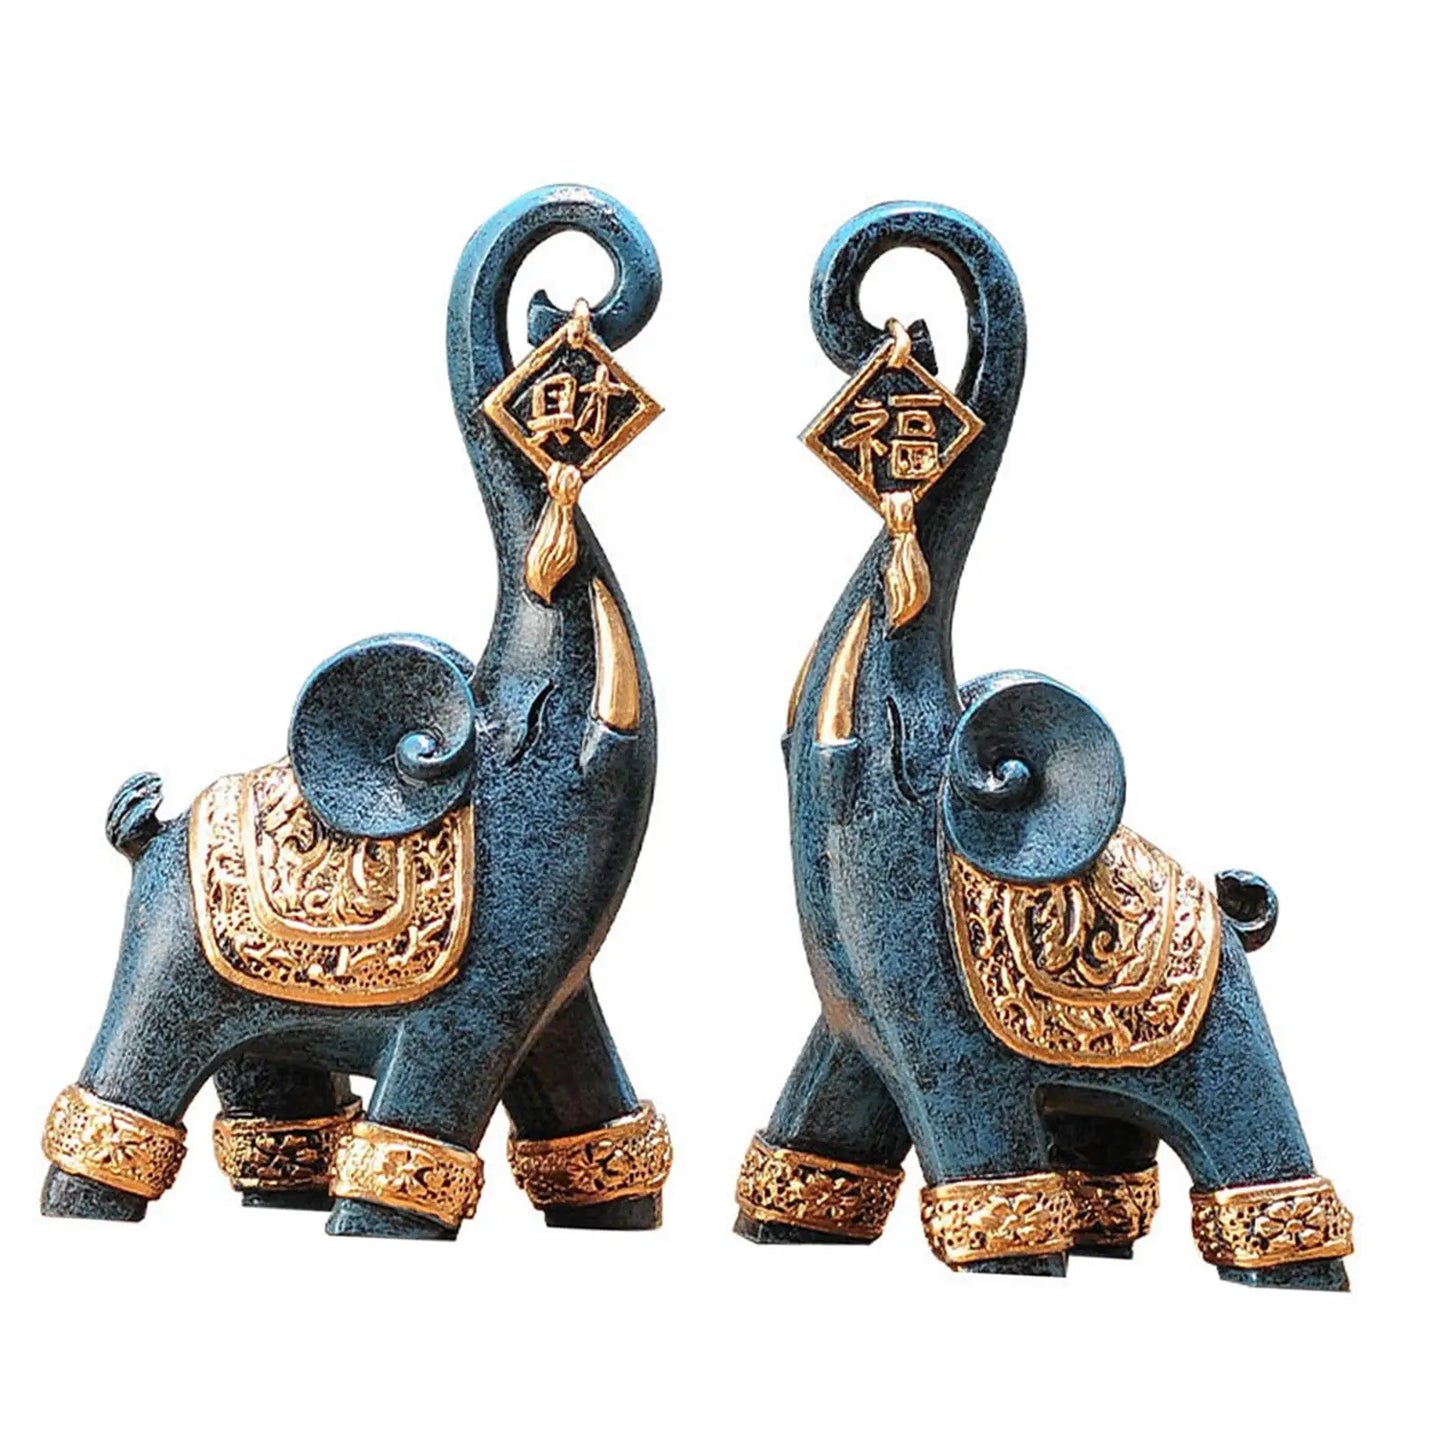 2x Elephant Statues Nordic Style Resin Elephant Figurine Sculpture Collection